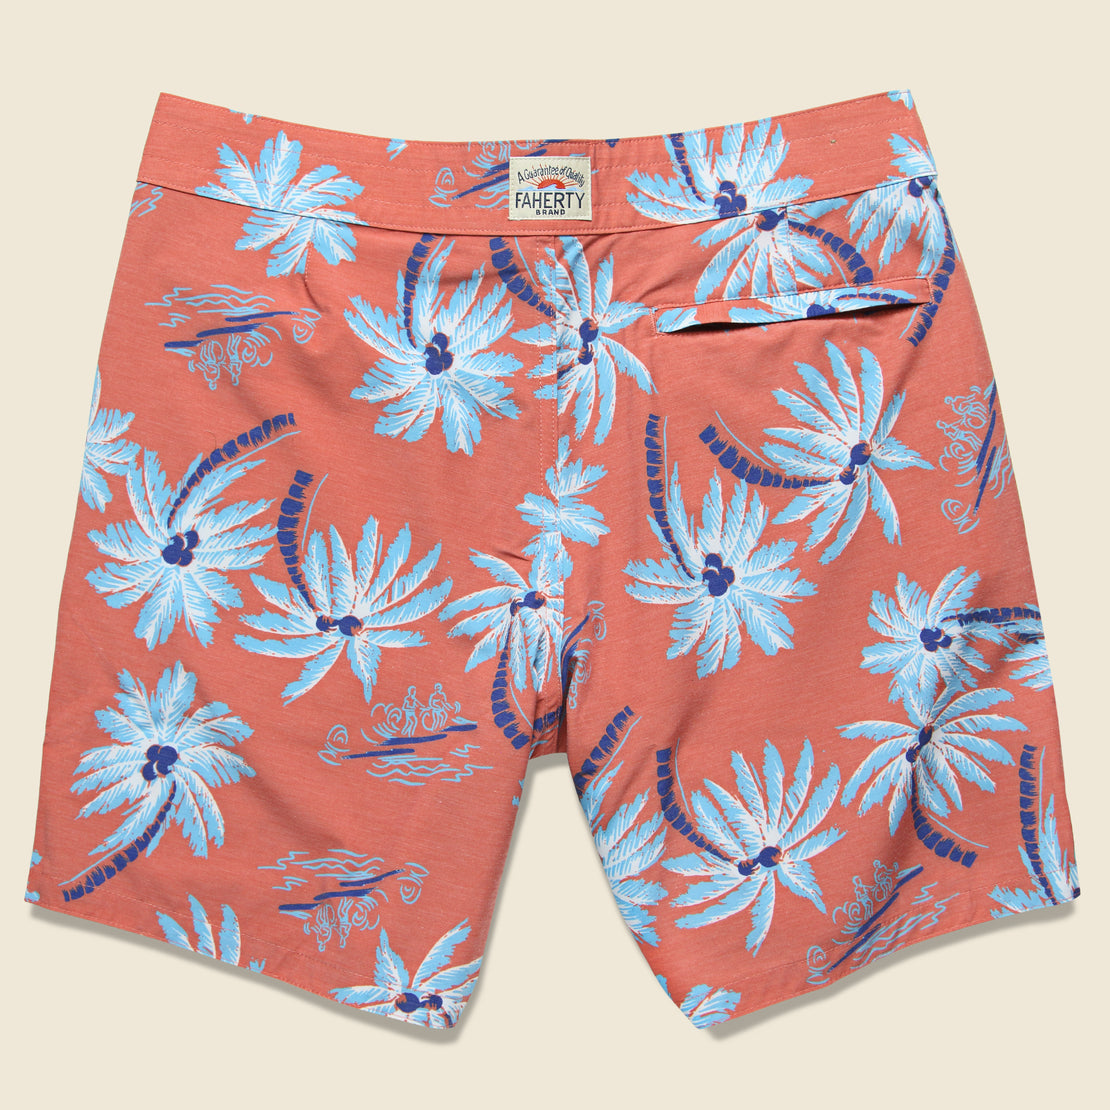 Classic 7" Boardshort - Red Palm